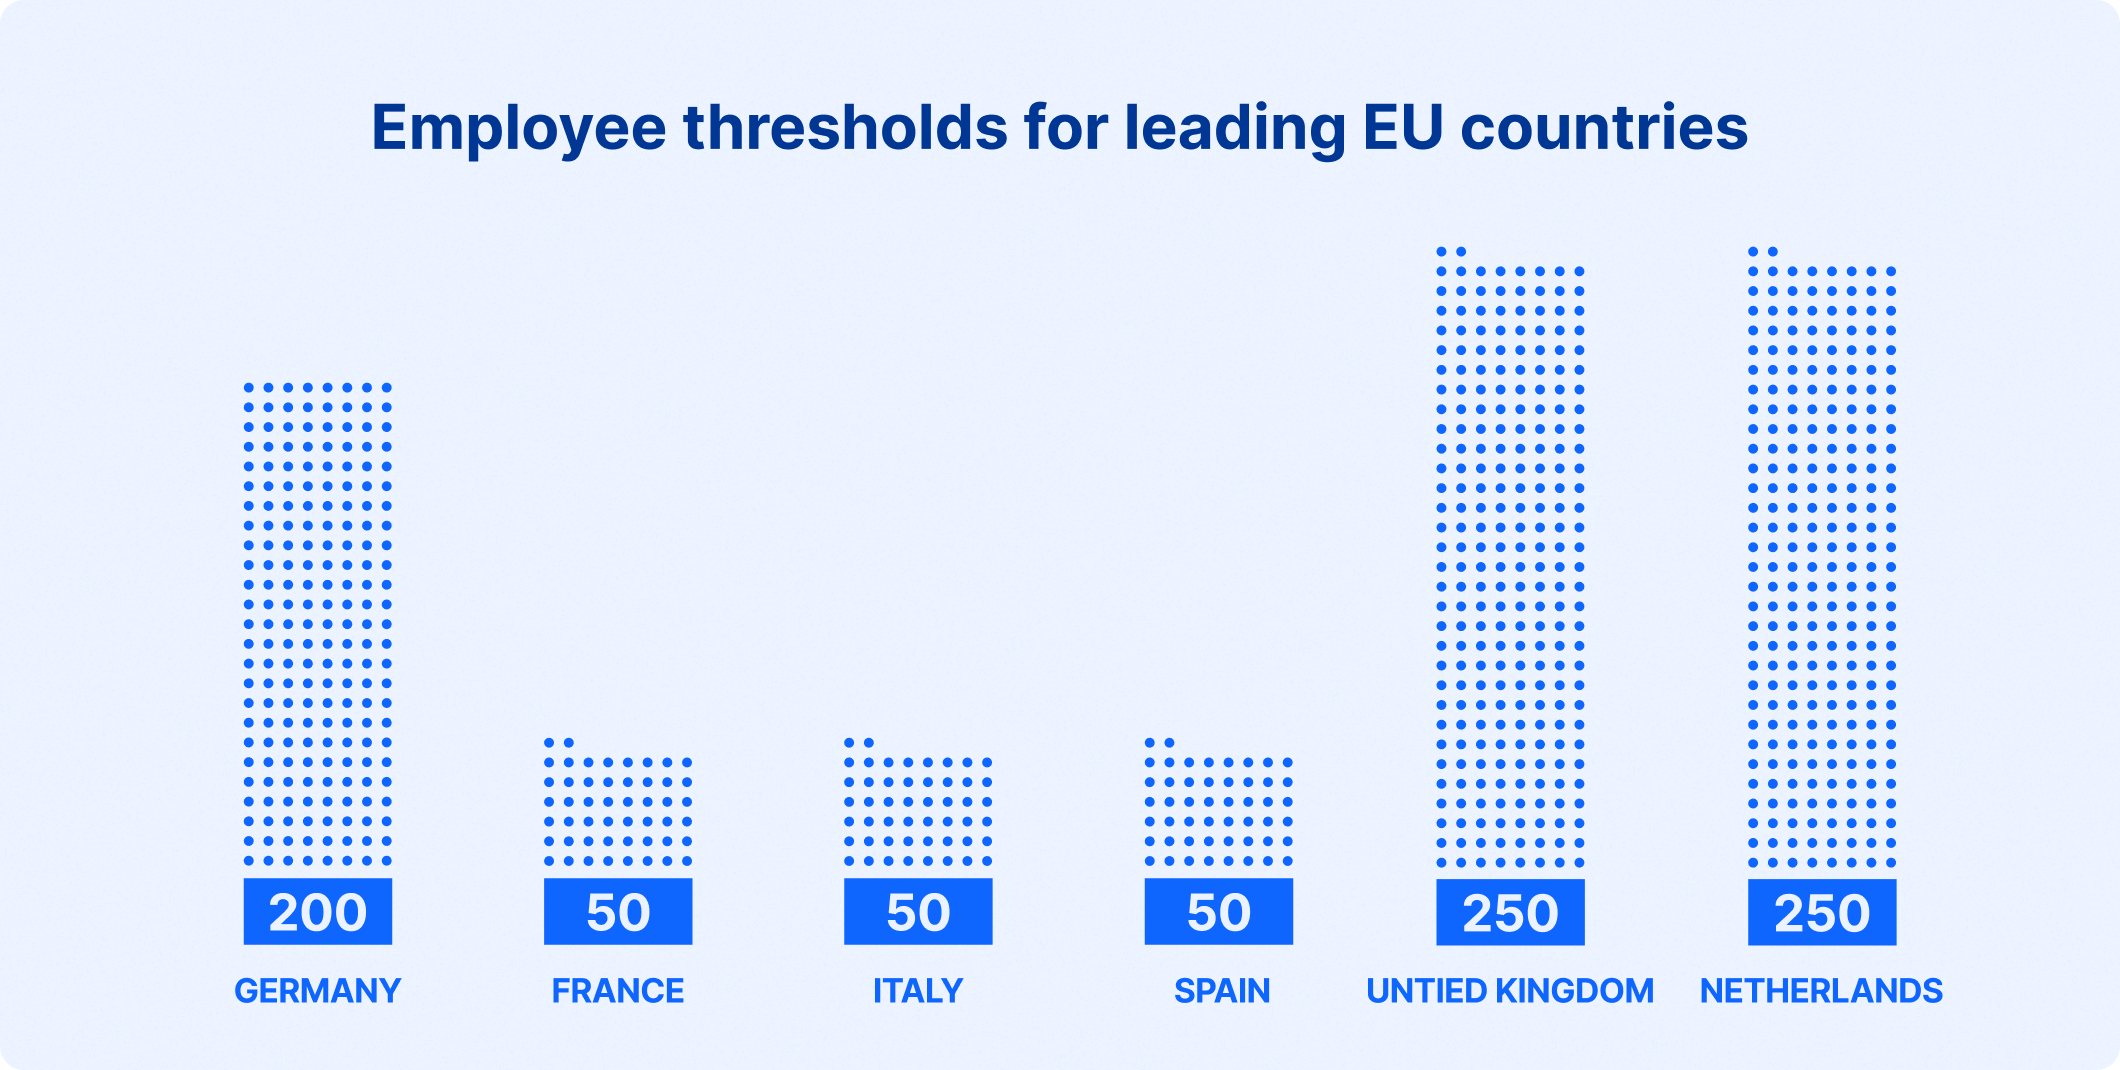 Employee thresholds for leading EU countries